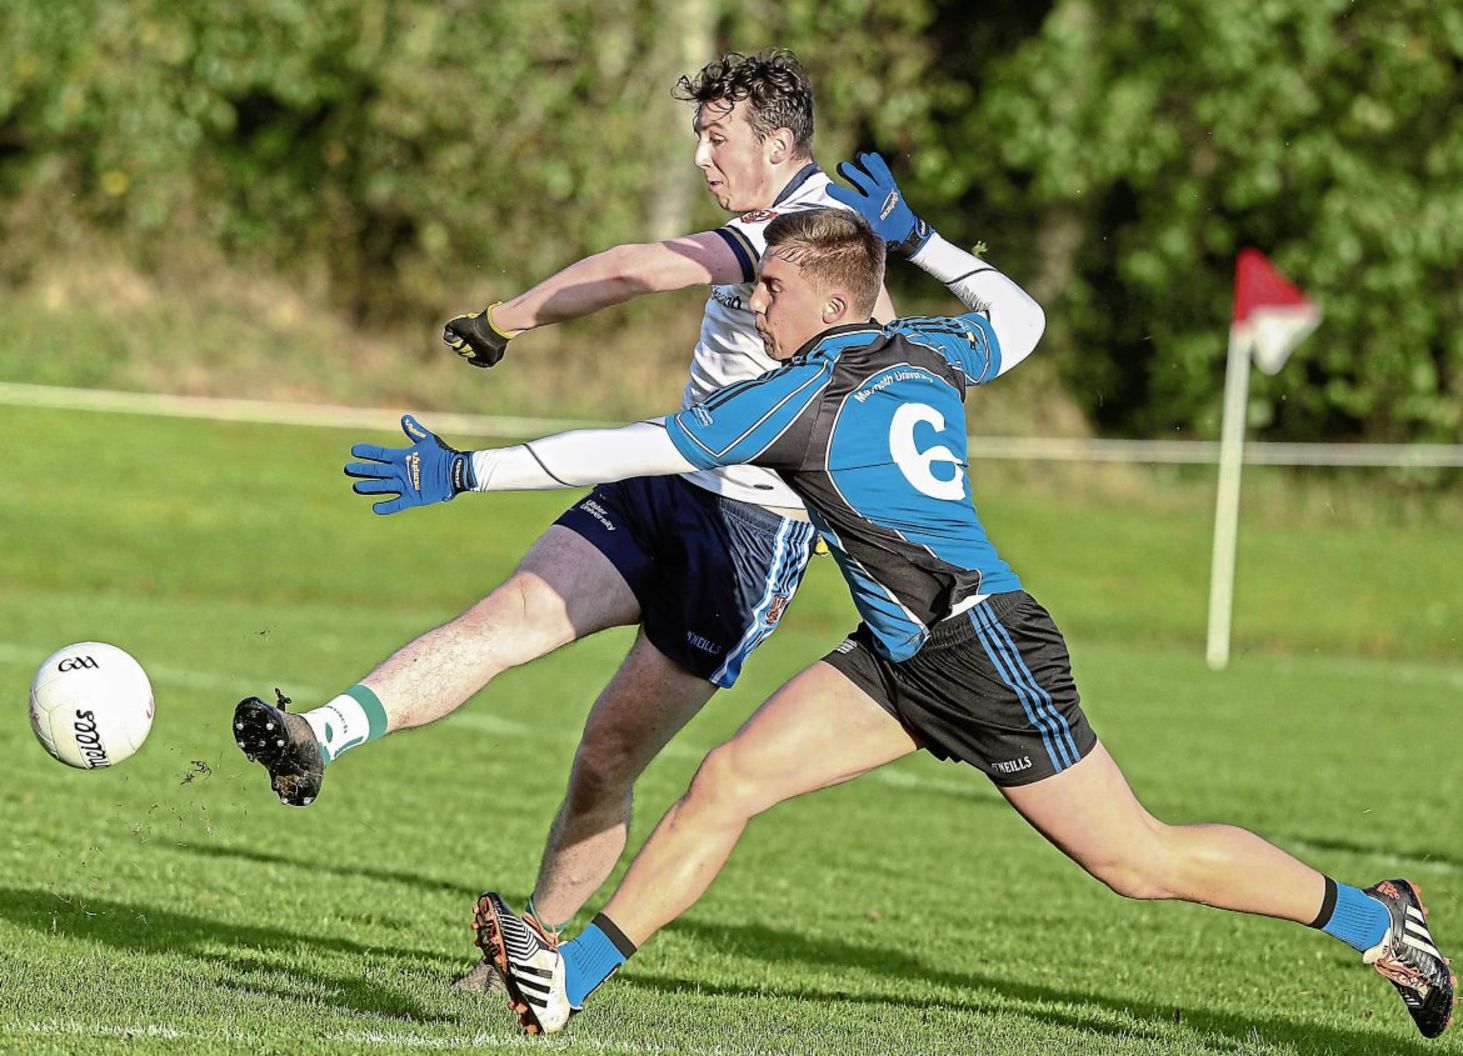 Ulster University's Thomas Clarke strikes for goal as Maynooth's Tom Hanifan attempts a block <br />Picture by Hugh Russell